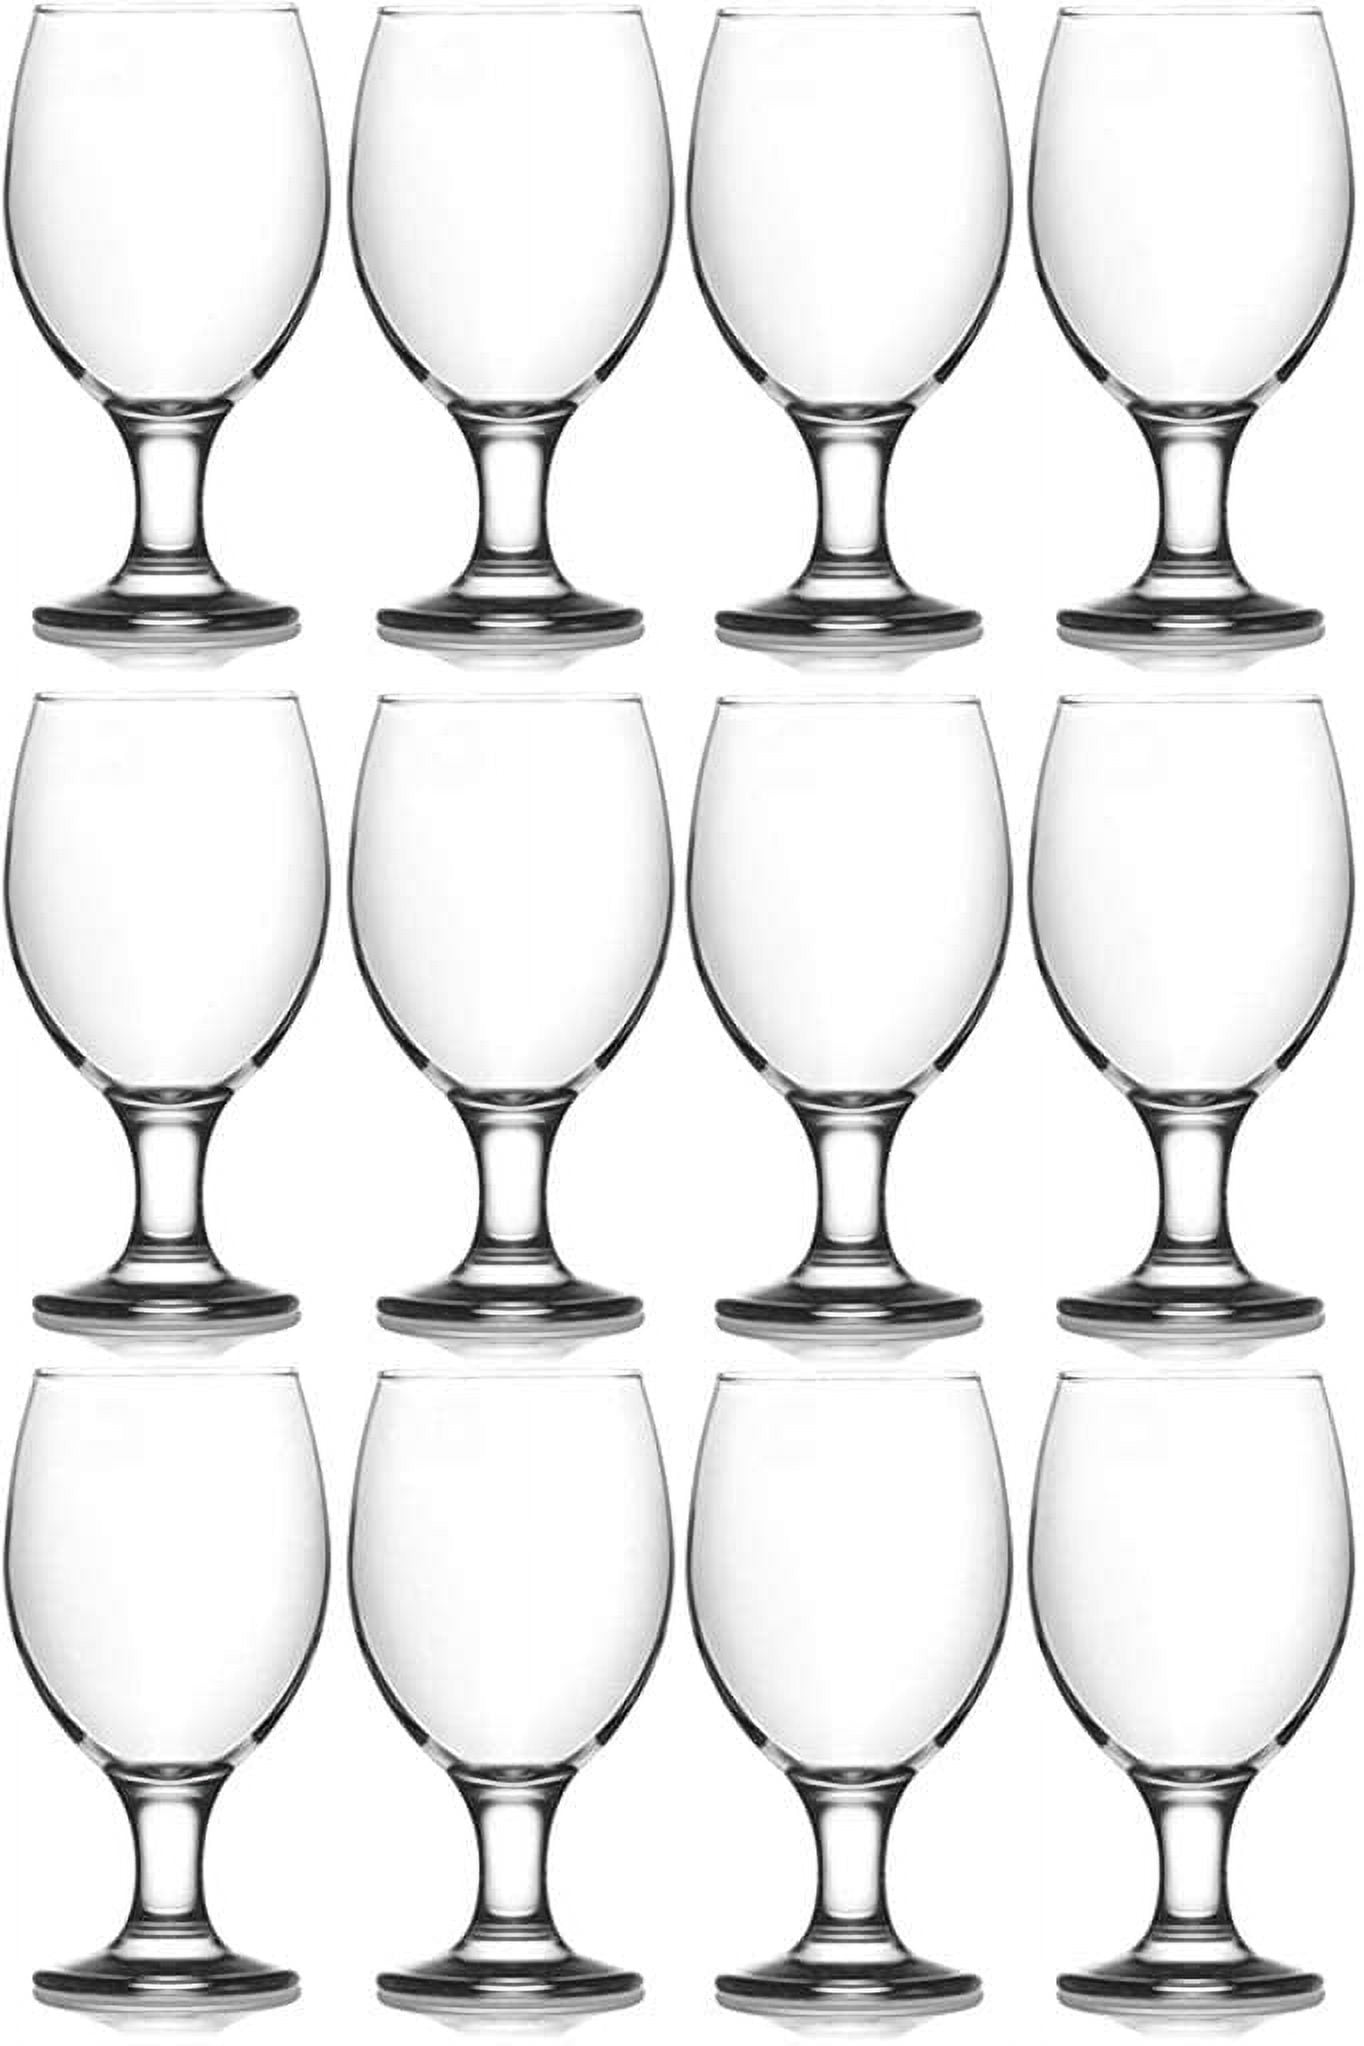 Water Glasses Drinking Cups Set, 12 oz Vintage Crystal Glassware Sets of 6,  Clear Drink Glasses, Aes…See more Water Glasses Drinking Cups Set, 12 oz